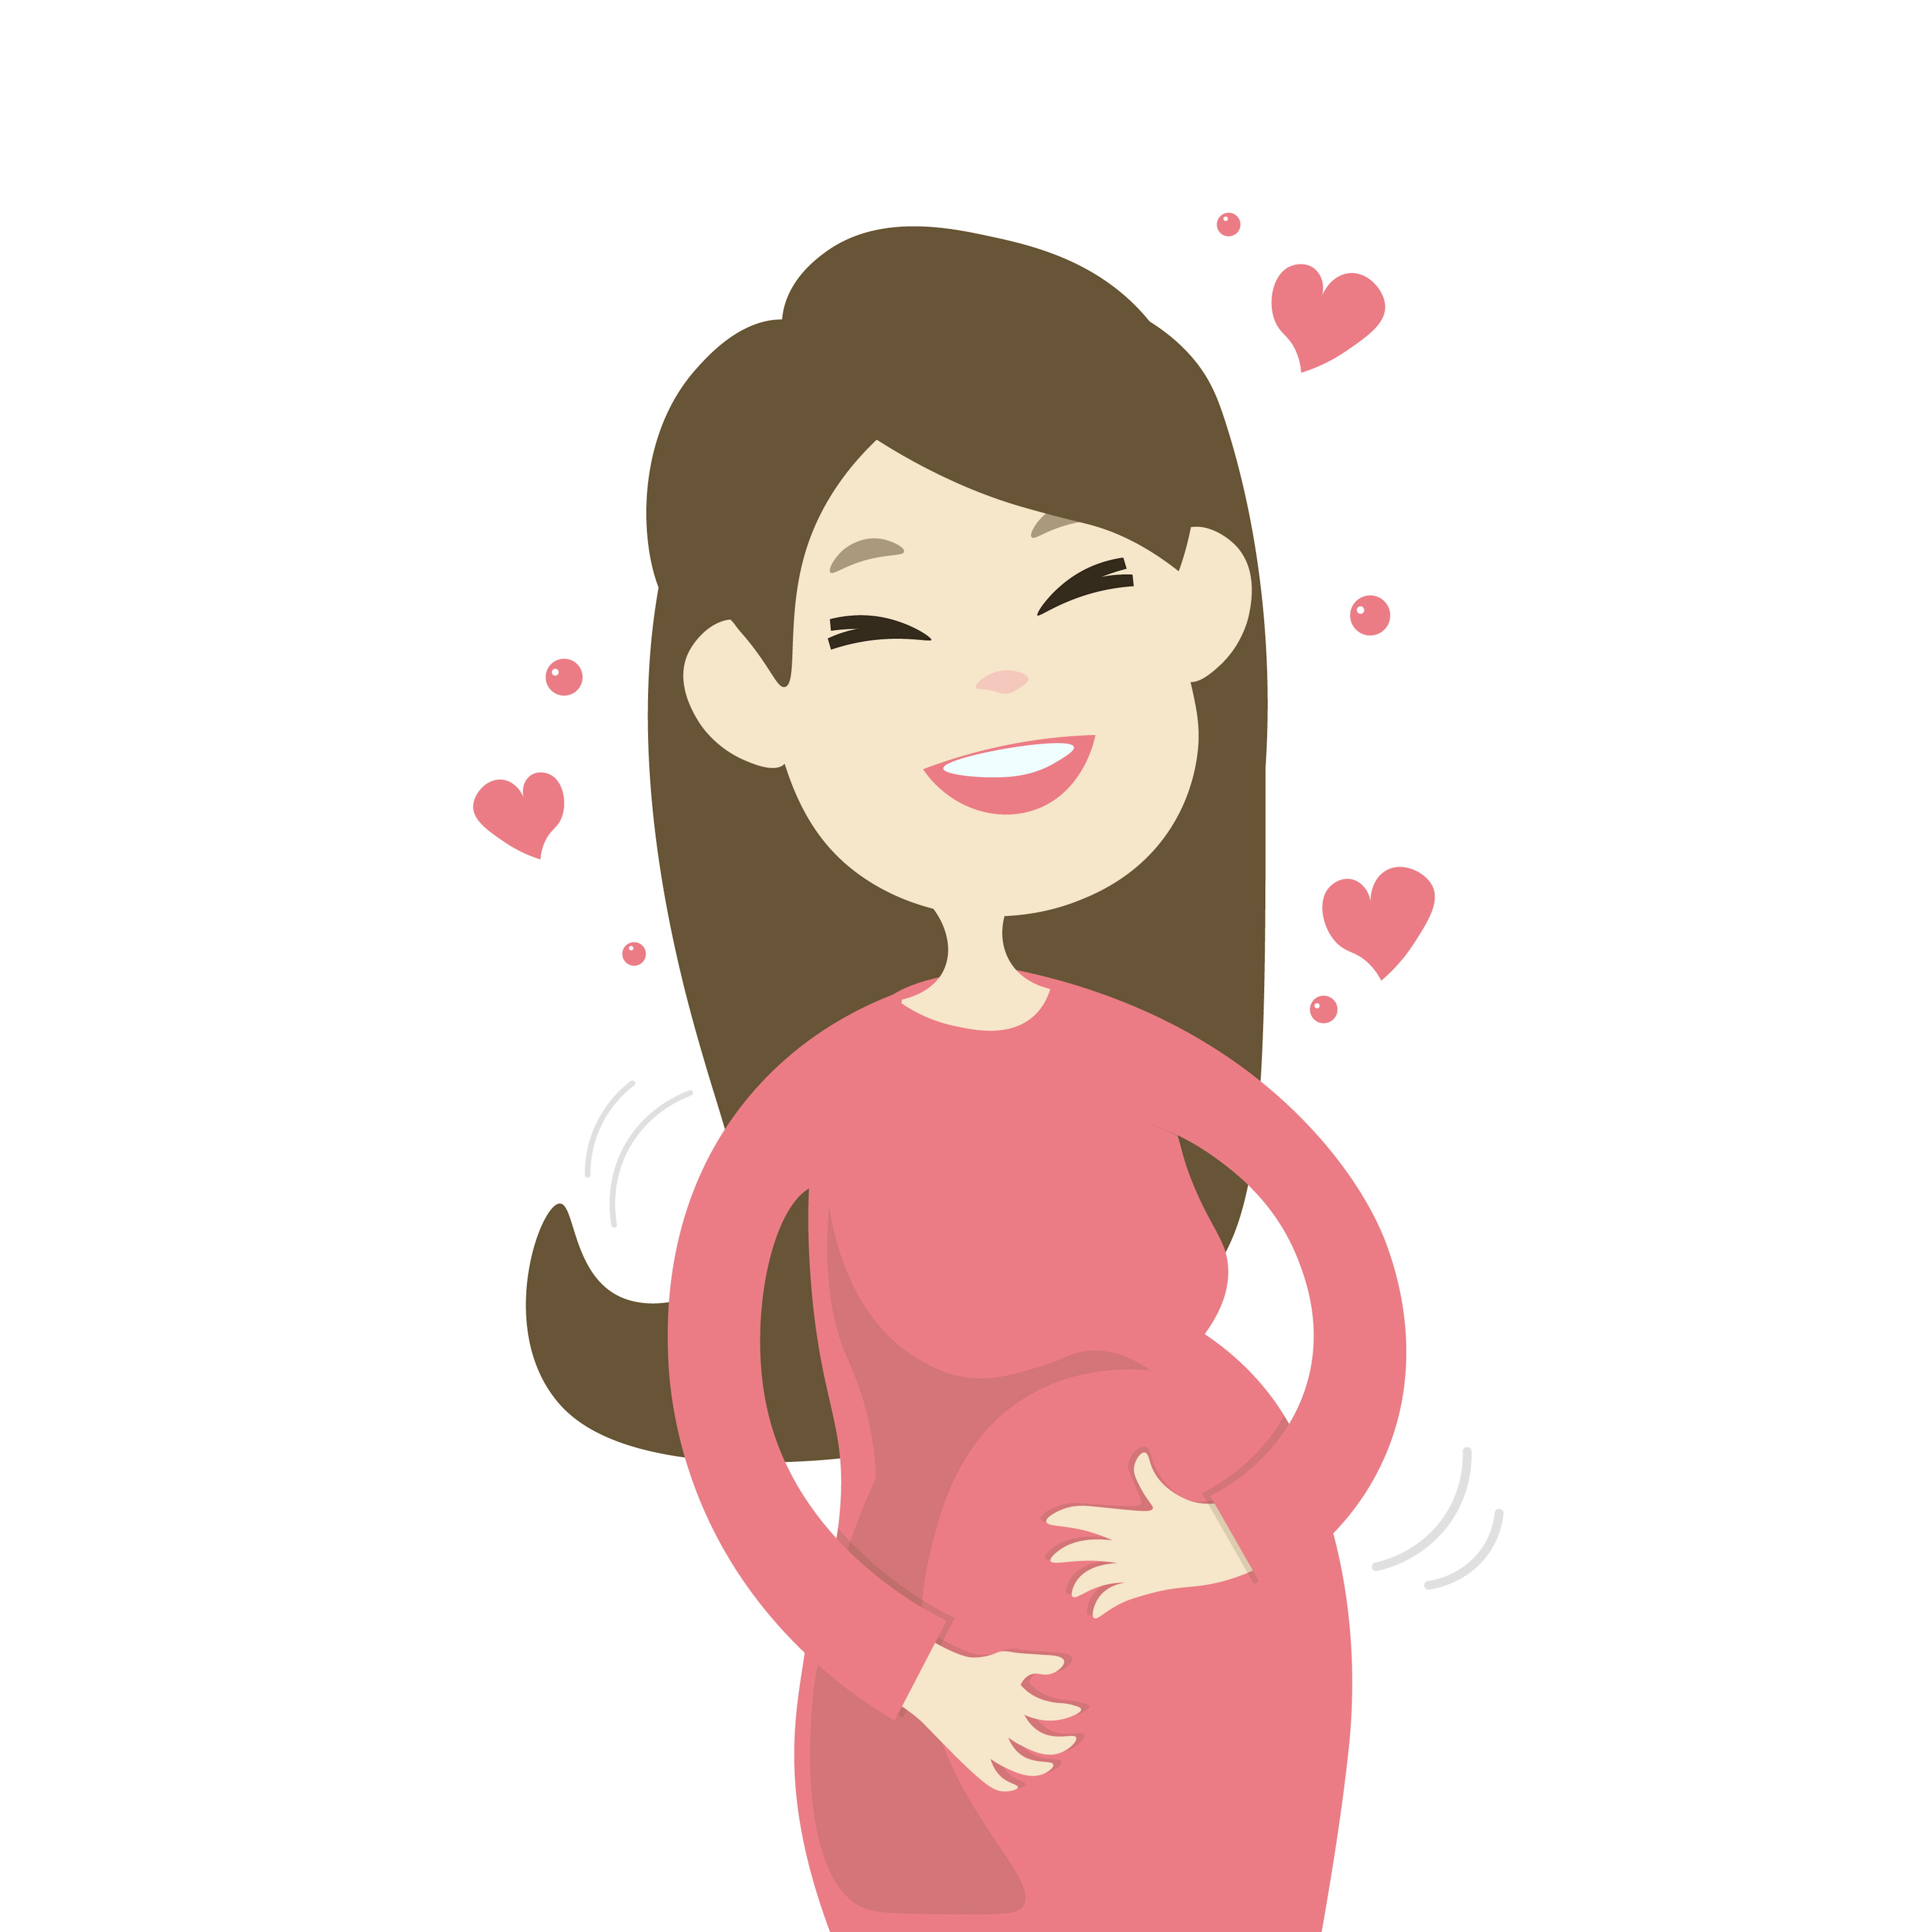 Pregnancy clipart happy. Smiling pregnant woman download